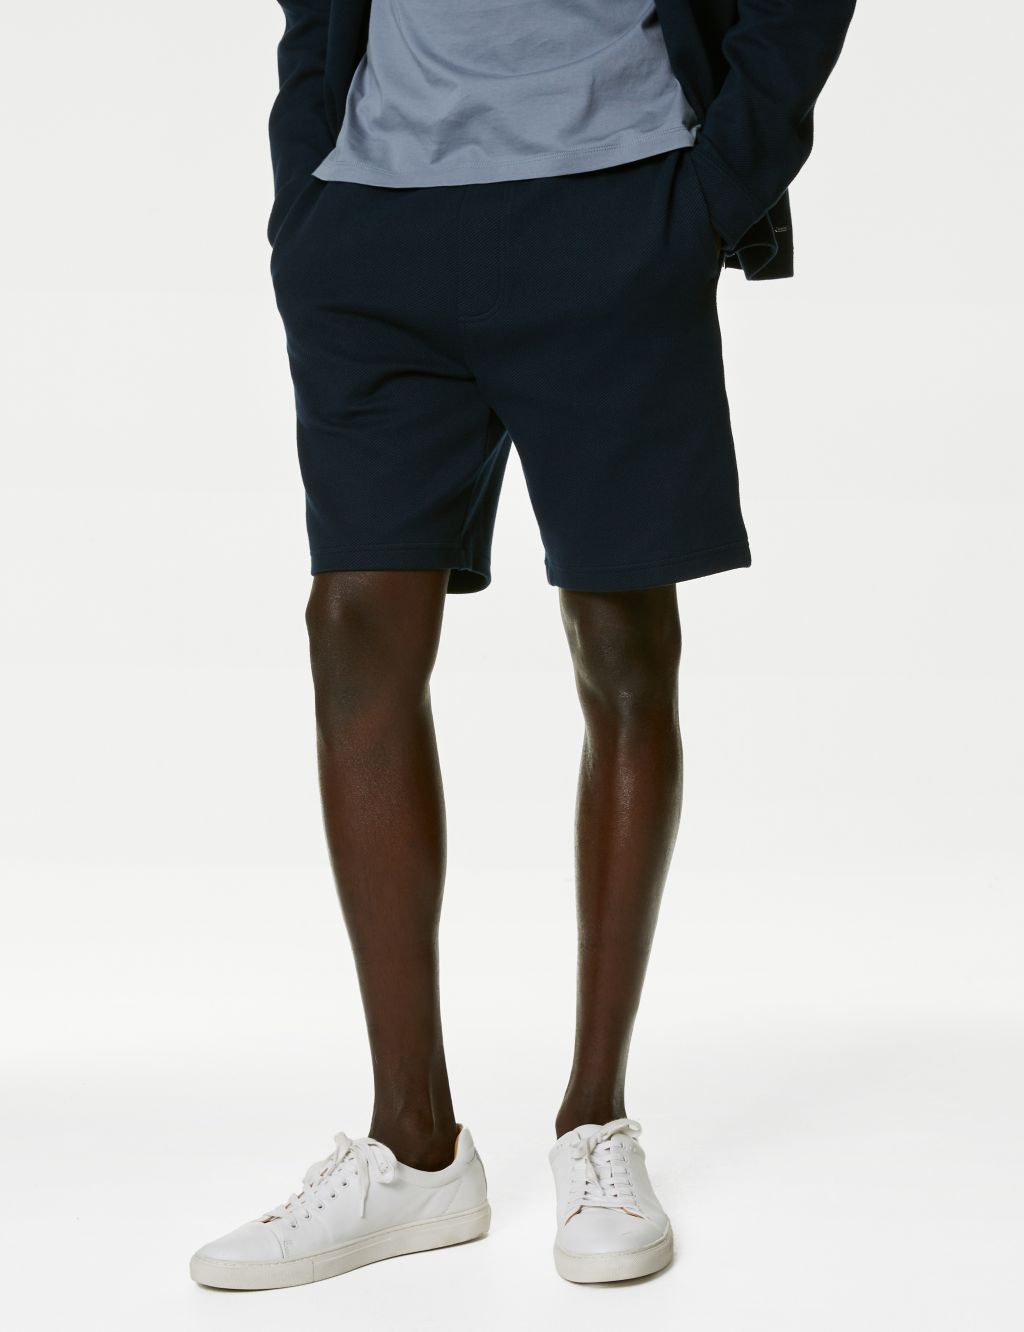 Jersey Textured Shorts image 4